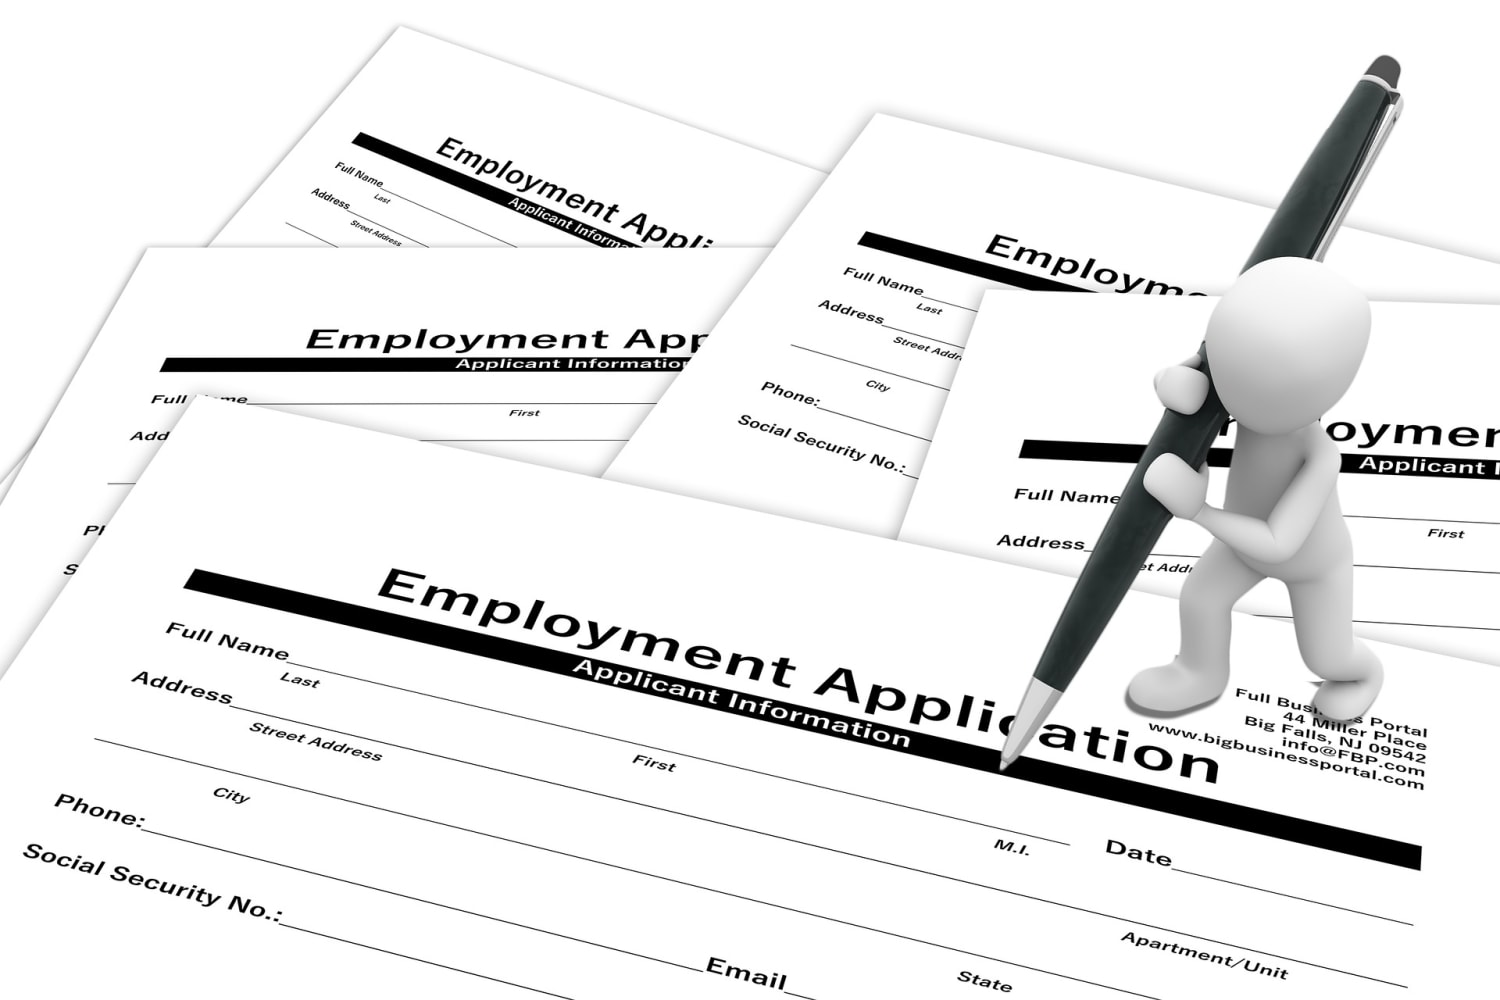 The benefits of researching job applicants and their CV's